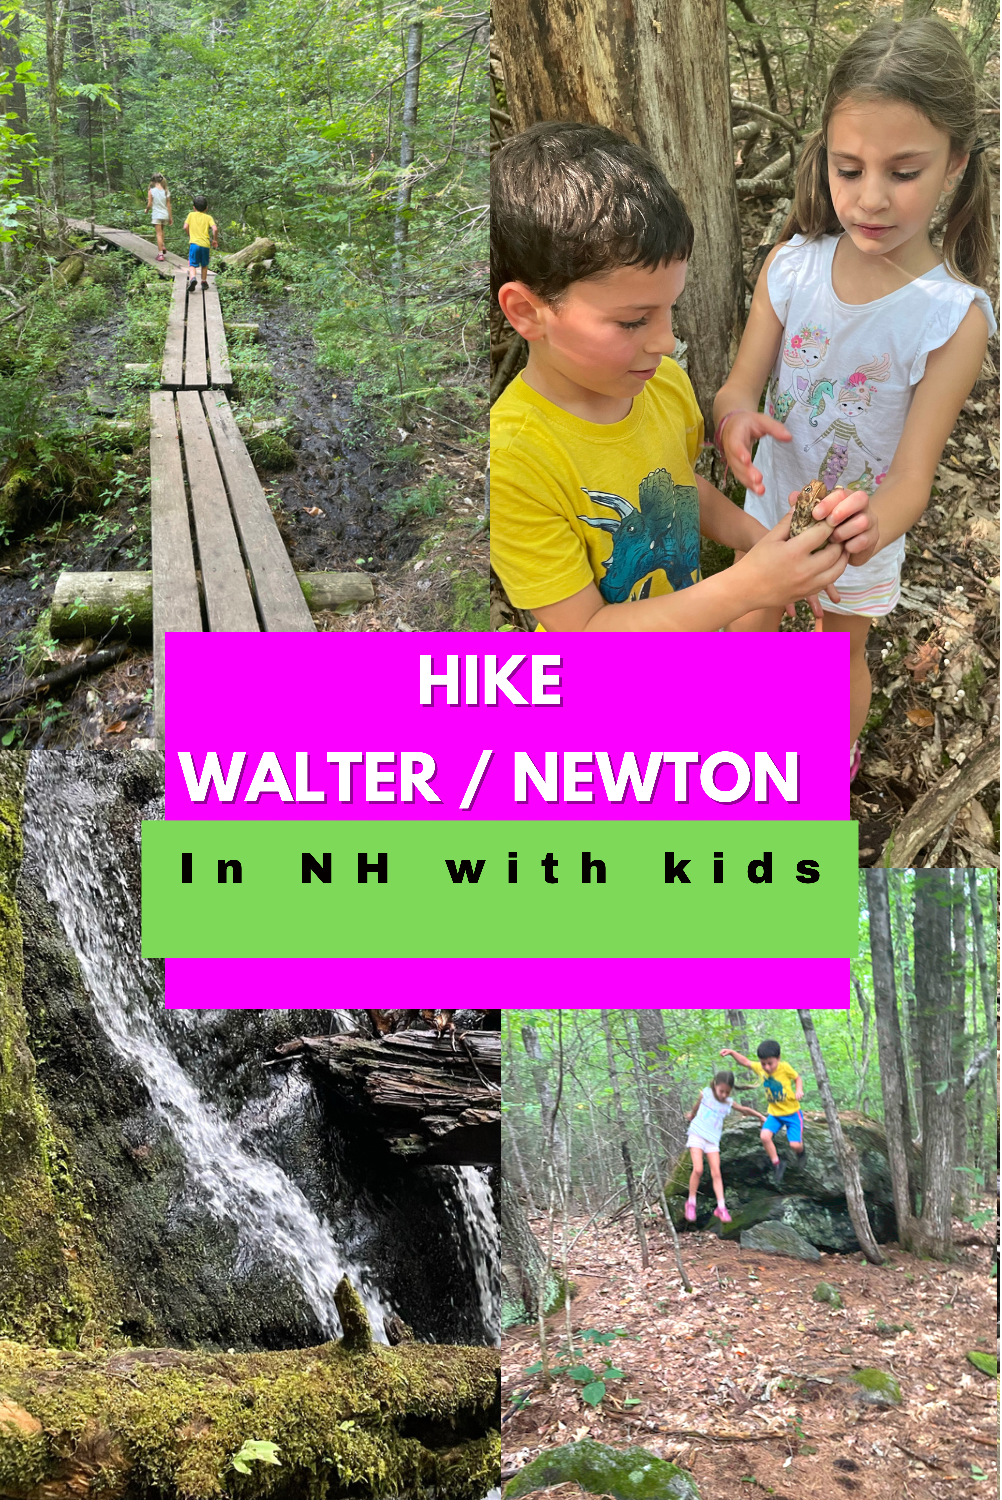 Walter / Newton Natural area in New Hampshire with kids